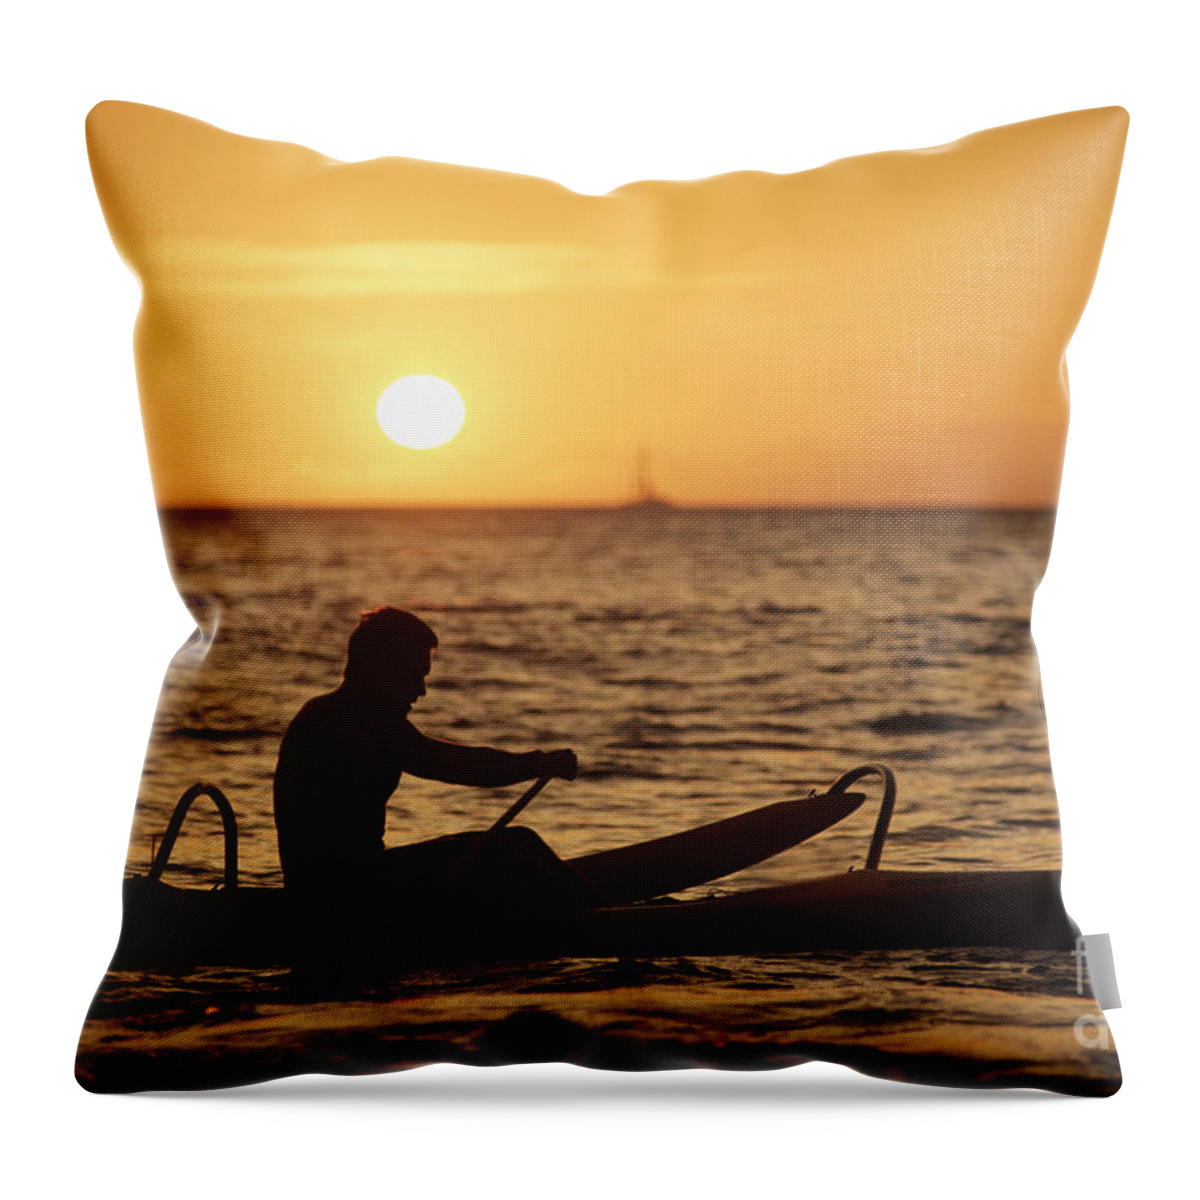 Afternoon Throw Pillow featuring the photograph One Man Canoe by Sri Maiava Rusden - Printscapes